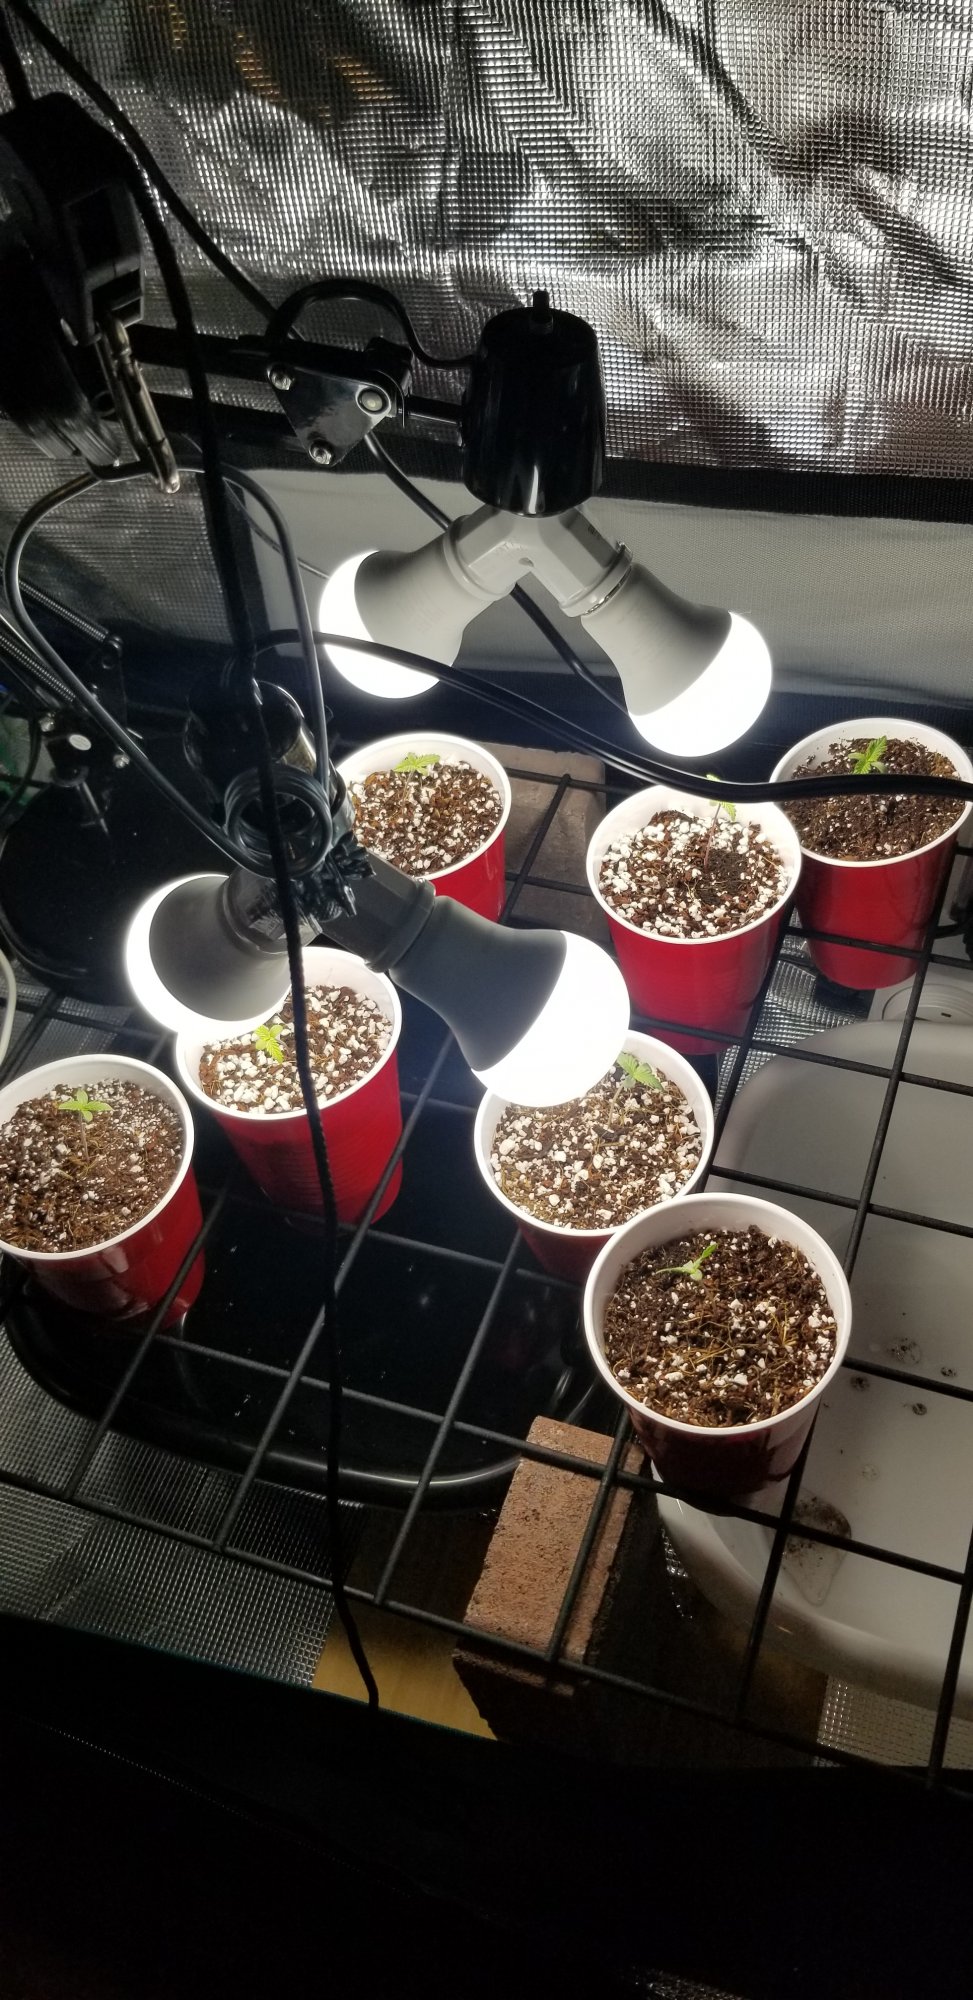 Trial error monitoring adjusting first grow coco coir daily pics and updates 4